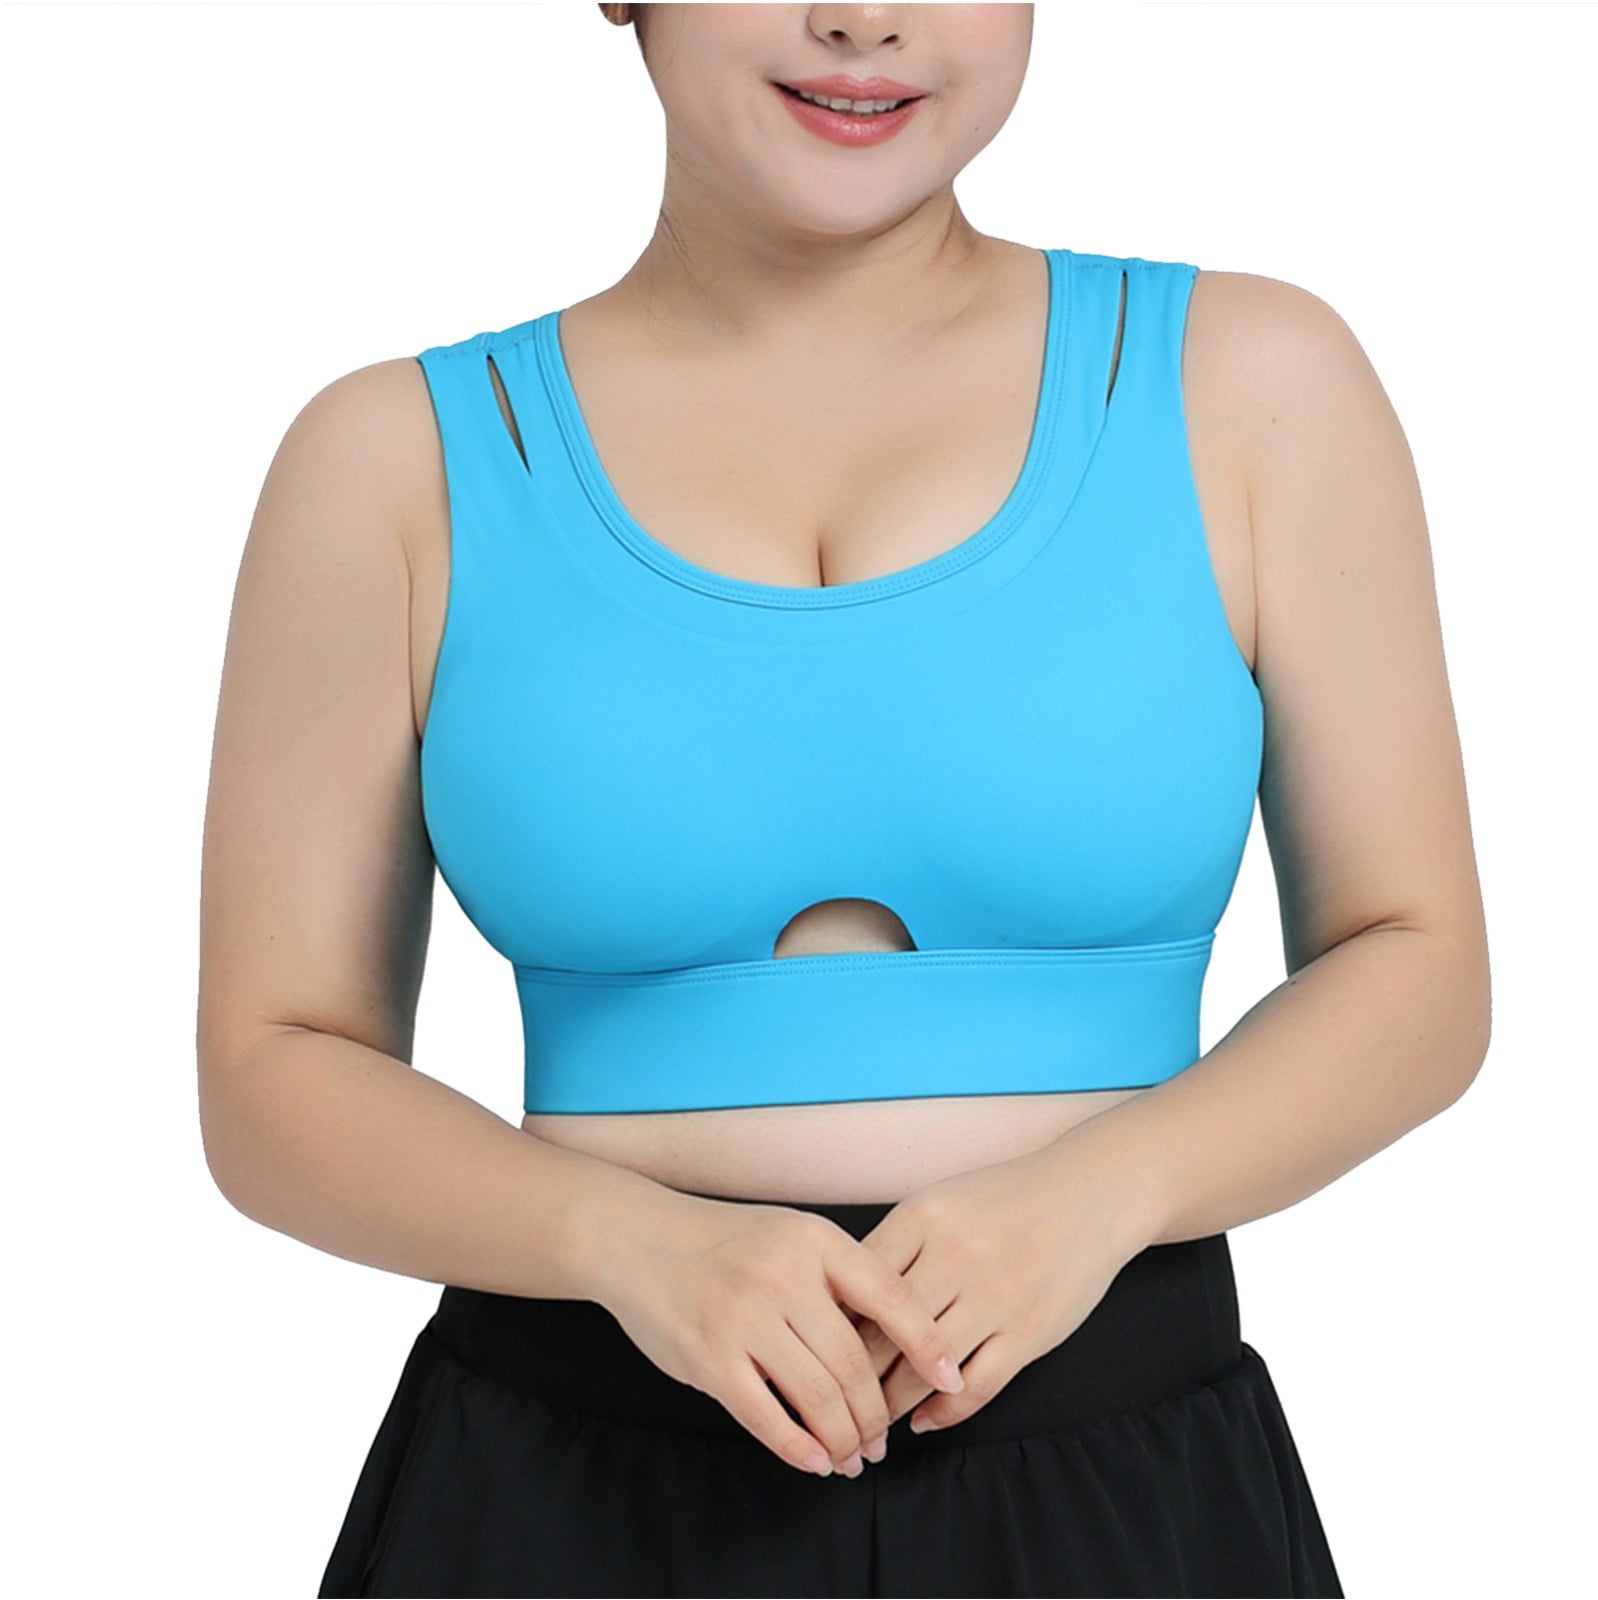 RQYYD Plus Size Sports Bras for Women Sexy Front Cutout Hollow Workout  Padded Gym Running Yoga Bra Black XXL